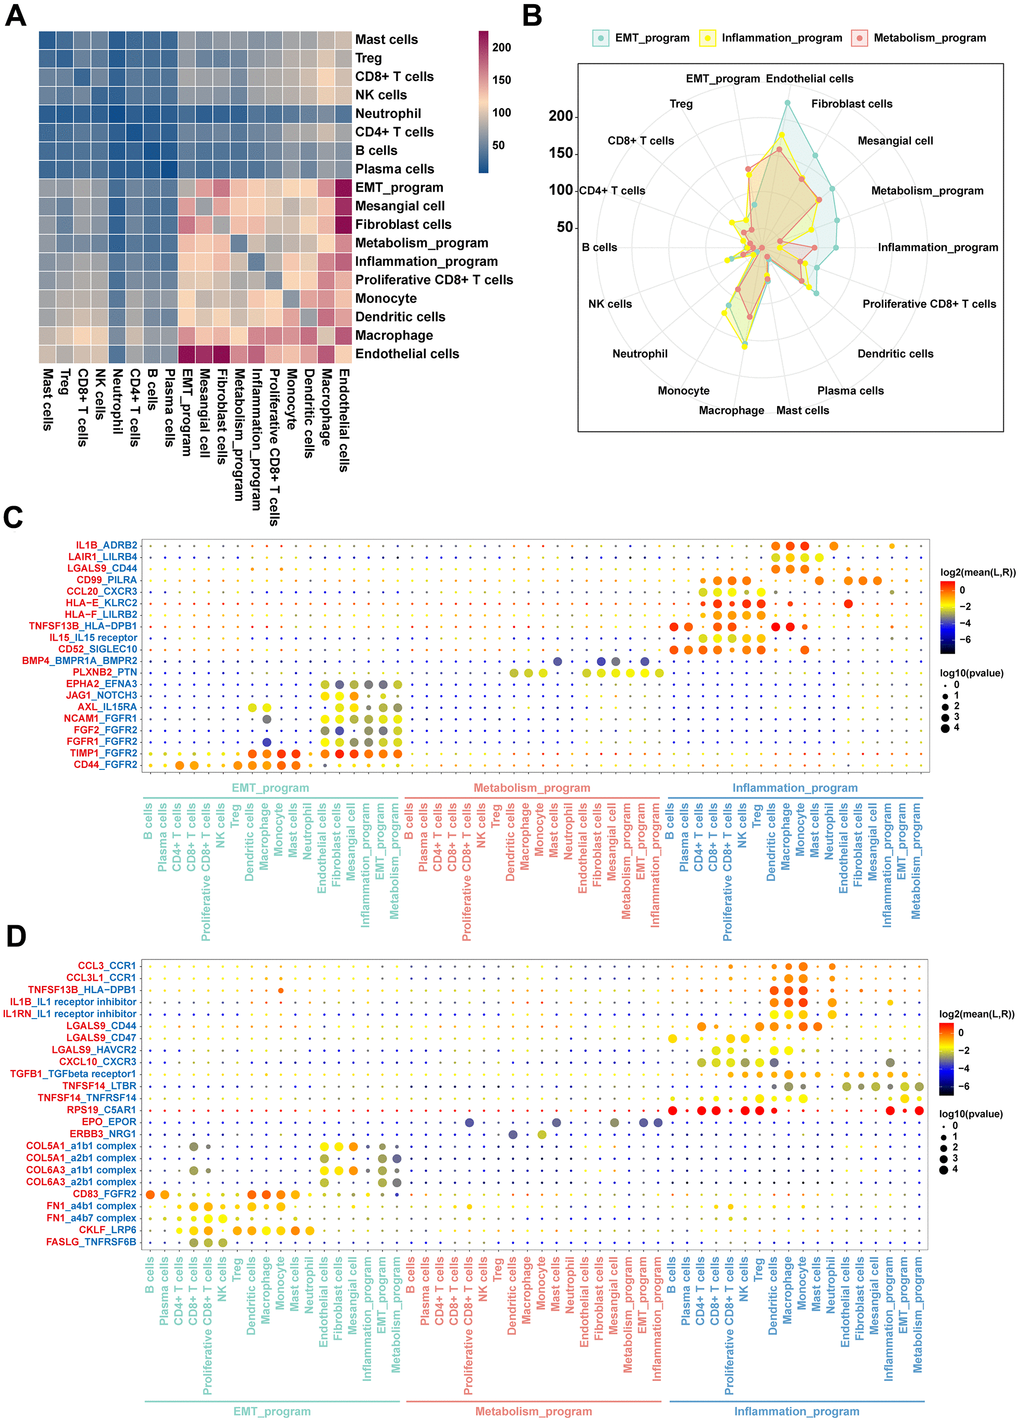 Intercellular communication networks orchestrated by functionally heterogeneous cancer cells and other cellular identities in ccRCC TME. (A) Heatmap plot of the number of ligand-receptor pairs across disparate cell clusters. (B) Radar plot of quantitative comparisons of ligand-receptor pairs across cancer cells in disparate meta programs. (C) Dot plots of mean interaction strengths of ligand-receptor pairs between functionally heterogeneous cancer cells, with dot sizes indicating the P-value and colored by the average expression level of the receptor in cancer cells. The plot for expression levels of the receptor in functionally heterogeneous cancer cells. (D) The plot showing the expression levels of the ligand in functionally heterogeneous cancer cells.